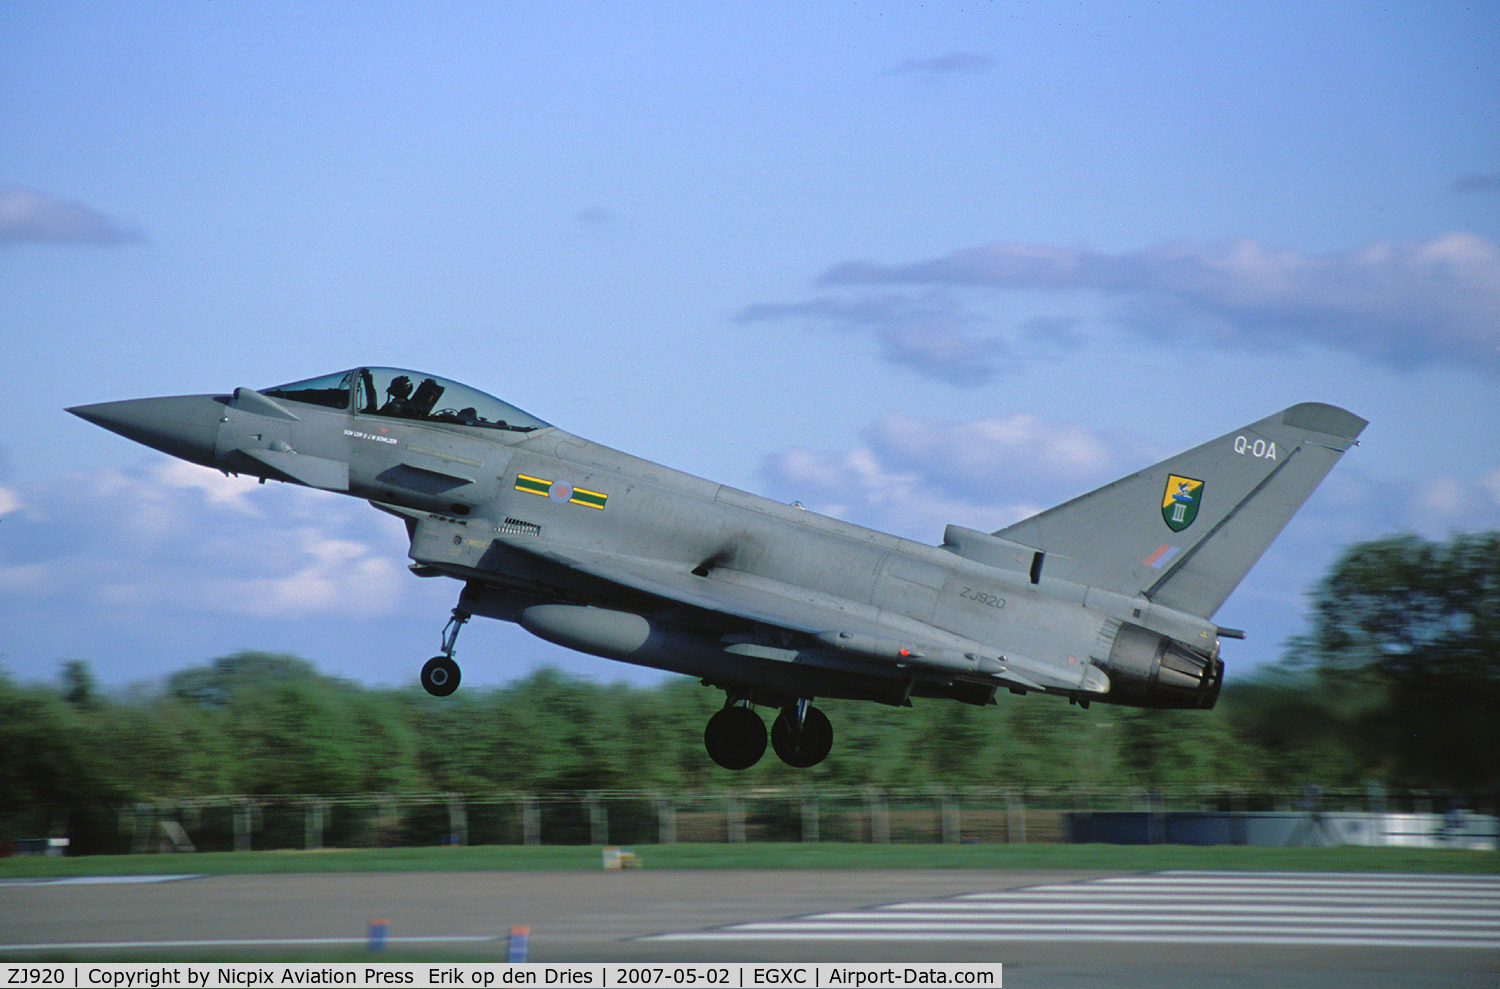 ZJ920, 2005 Eurofighter EF-2000 Typhoon FGR4 C/N 0067/BS011, Just a second before touching down.